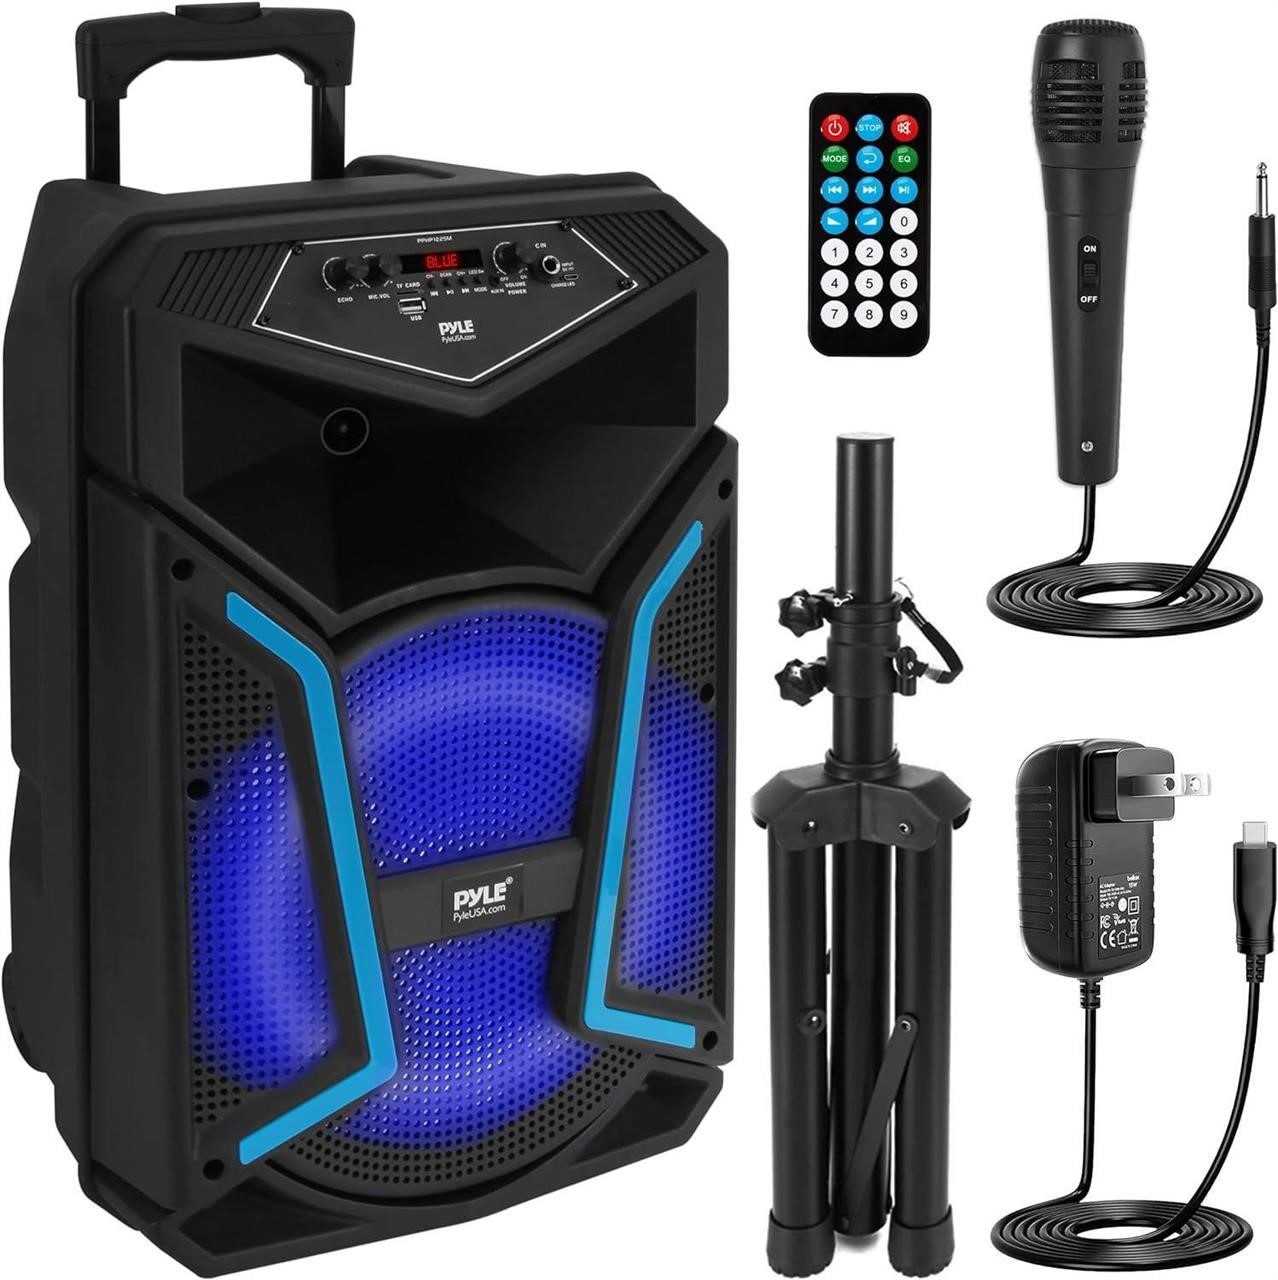 PYLE 800W Outdoor PA Speaker System